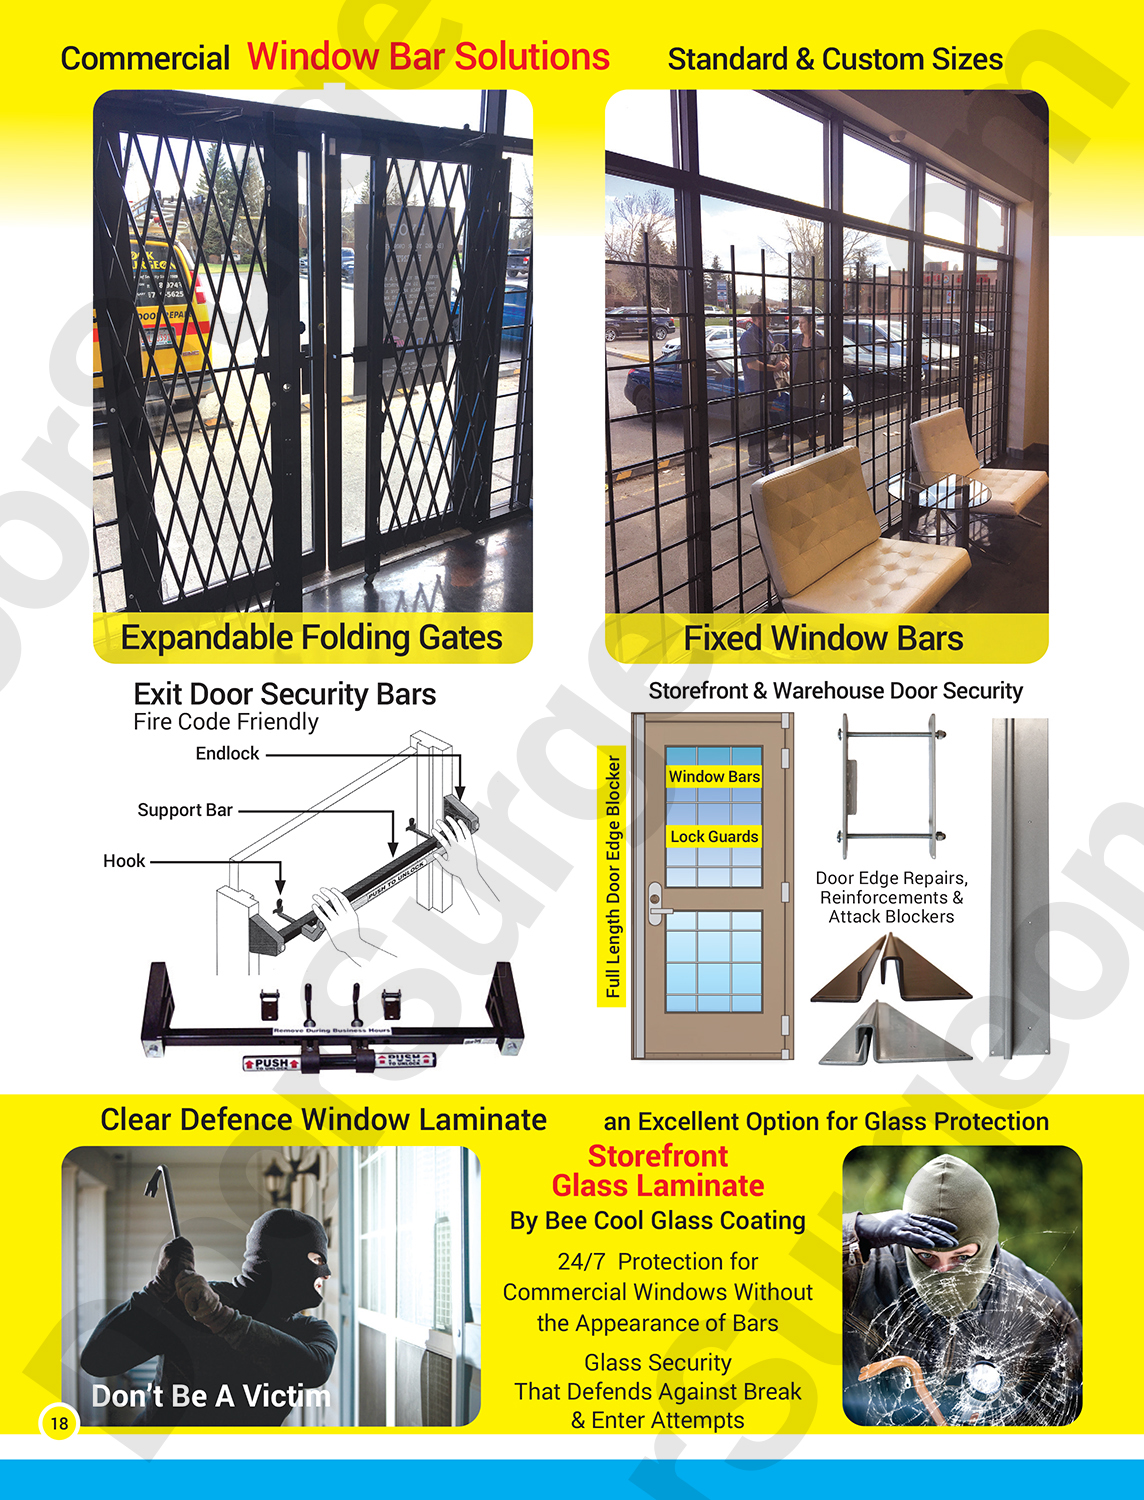 Commercial window bars, expandable folding gates, fixed window bars, exit door security bars.